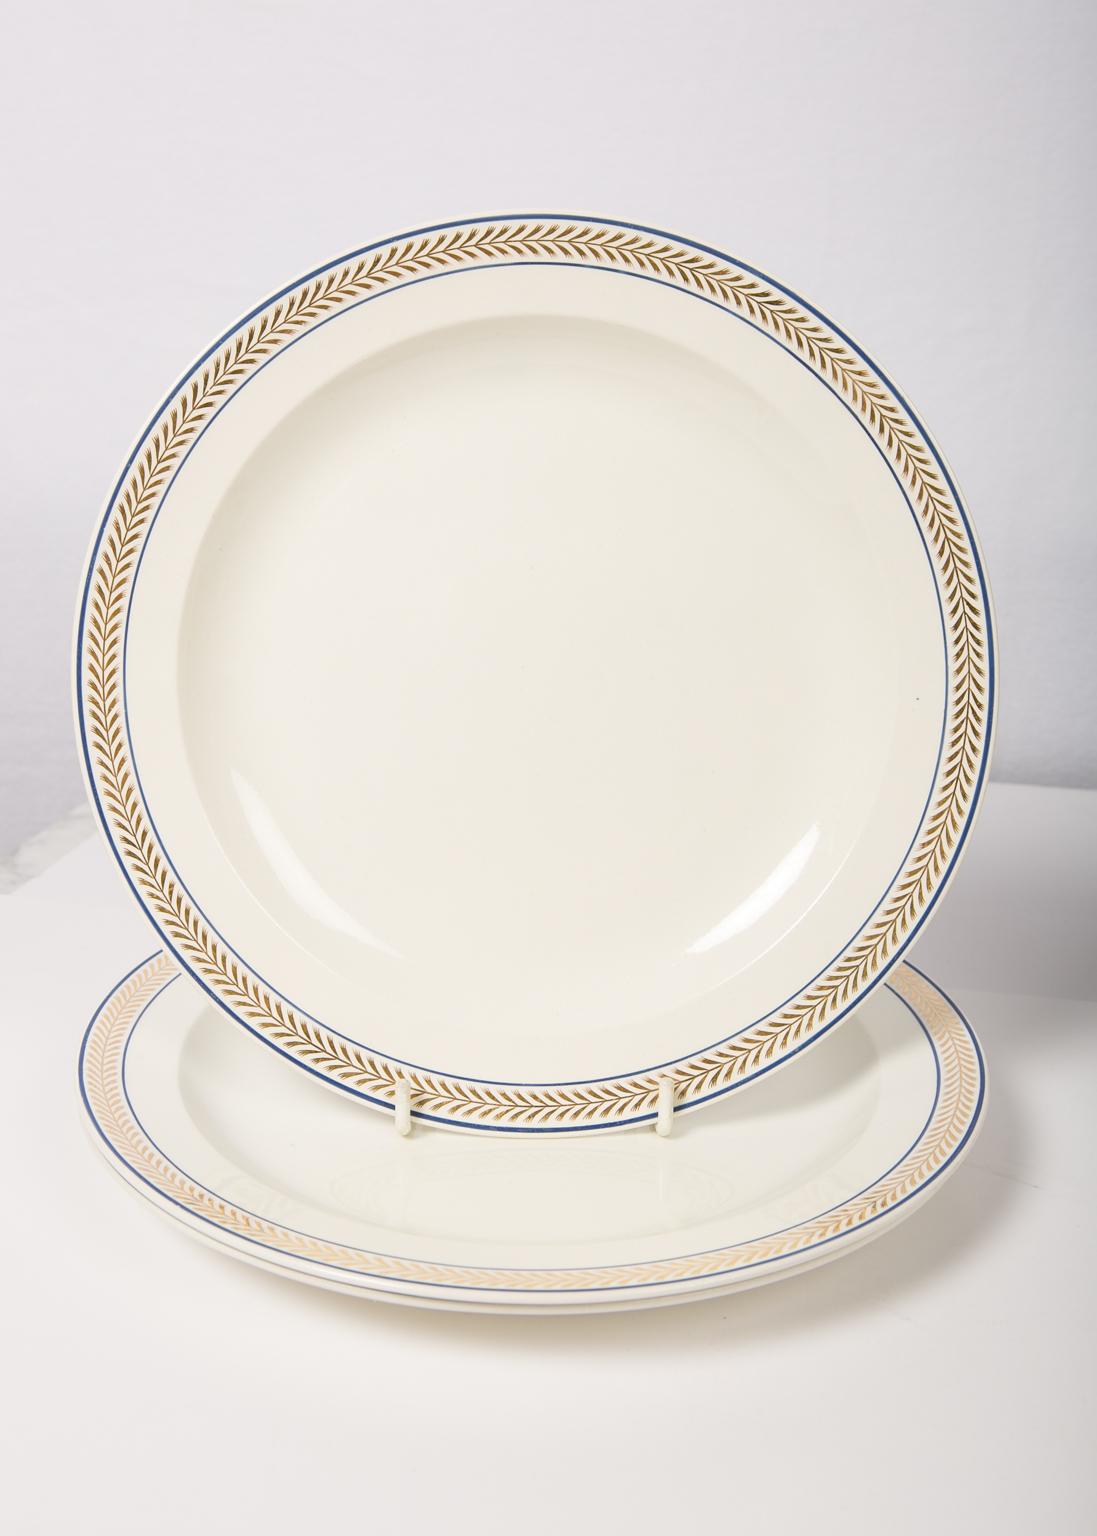 Wedgwood Antique Creamware Dinner Service with 57 Pieces England ca. 1820 10